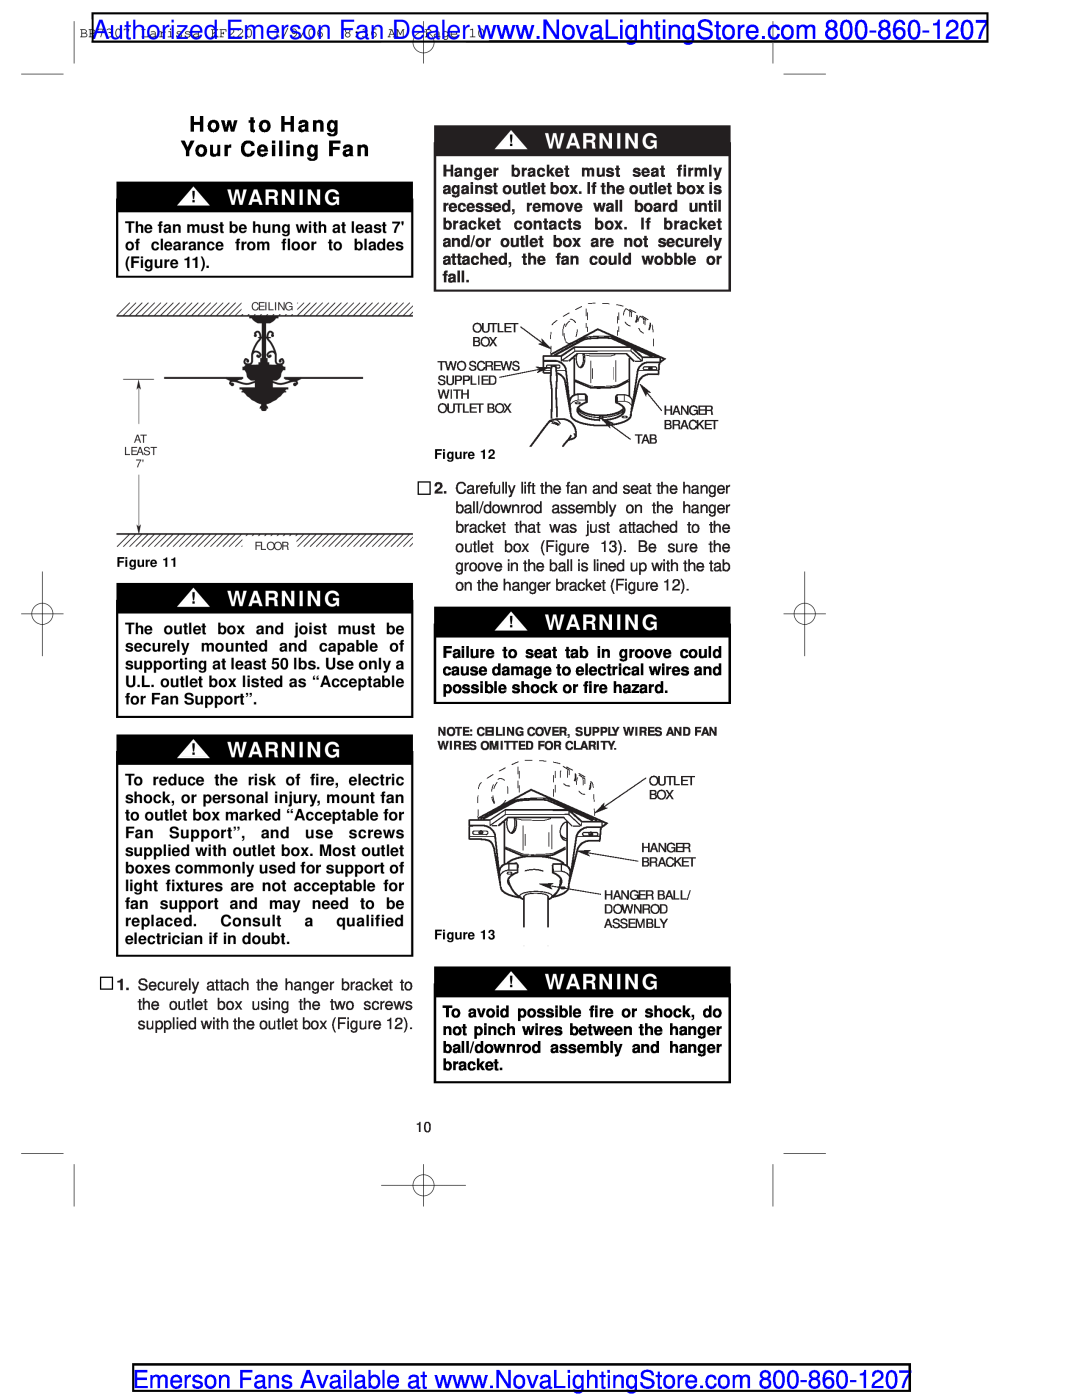 Emerson kf220tzg00 owner manual How to Hang Your Ceiling Fan 